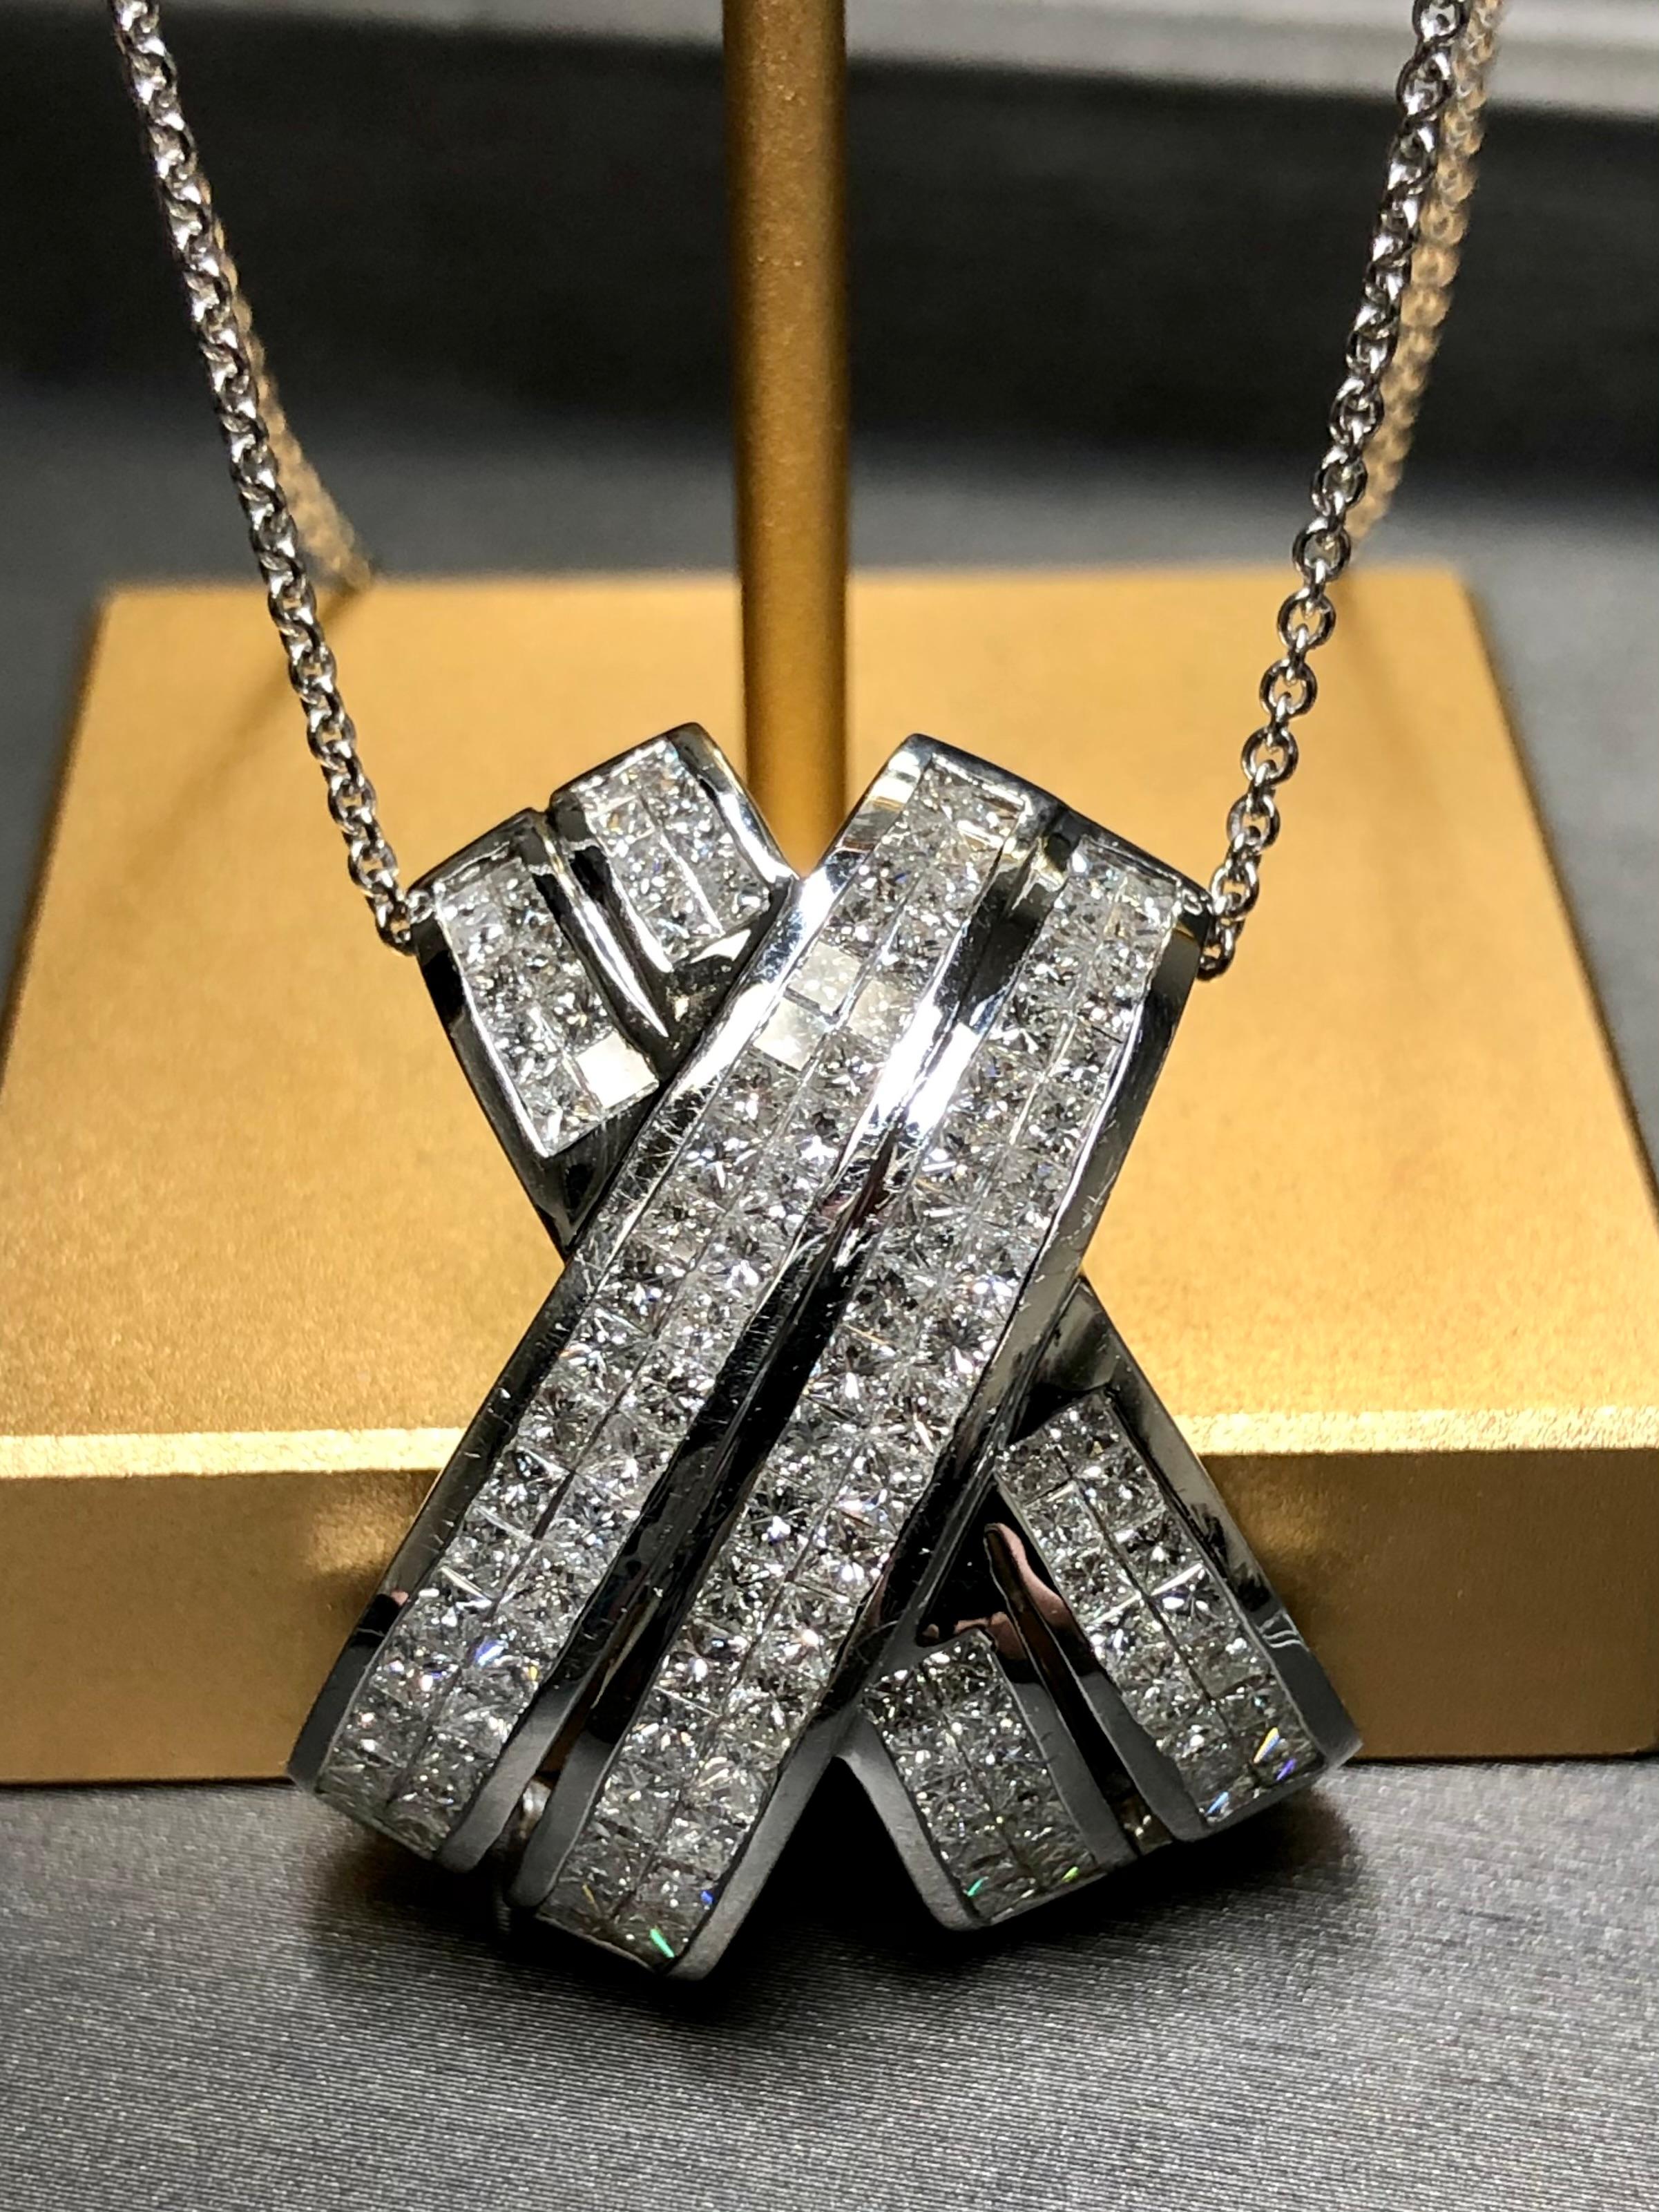 A contemporary yet classic pendant done in 18K white gold set with approximately 4cttw in graduating bright and lively princess cut diamonds ranging G to I in color and Vs1 to Si1 in clarity. A bold and IMPRESSIVE addition to any